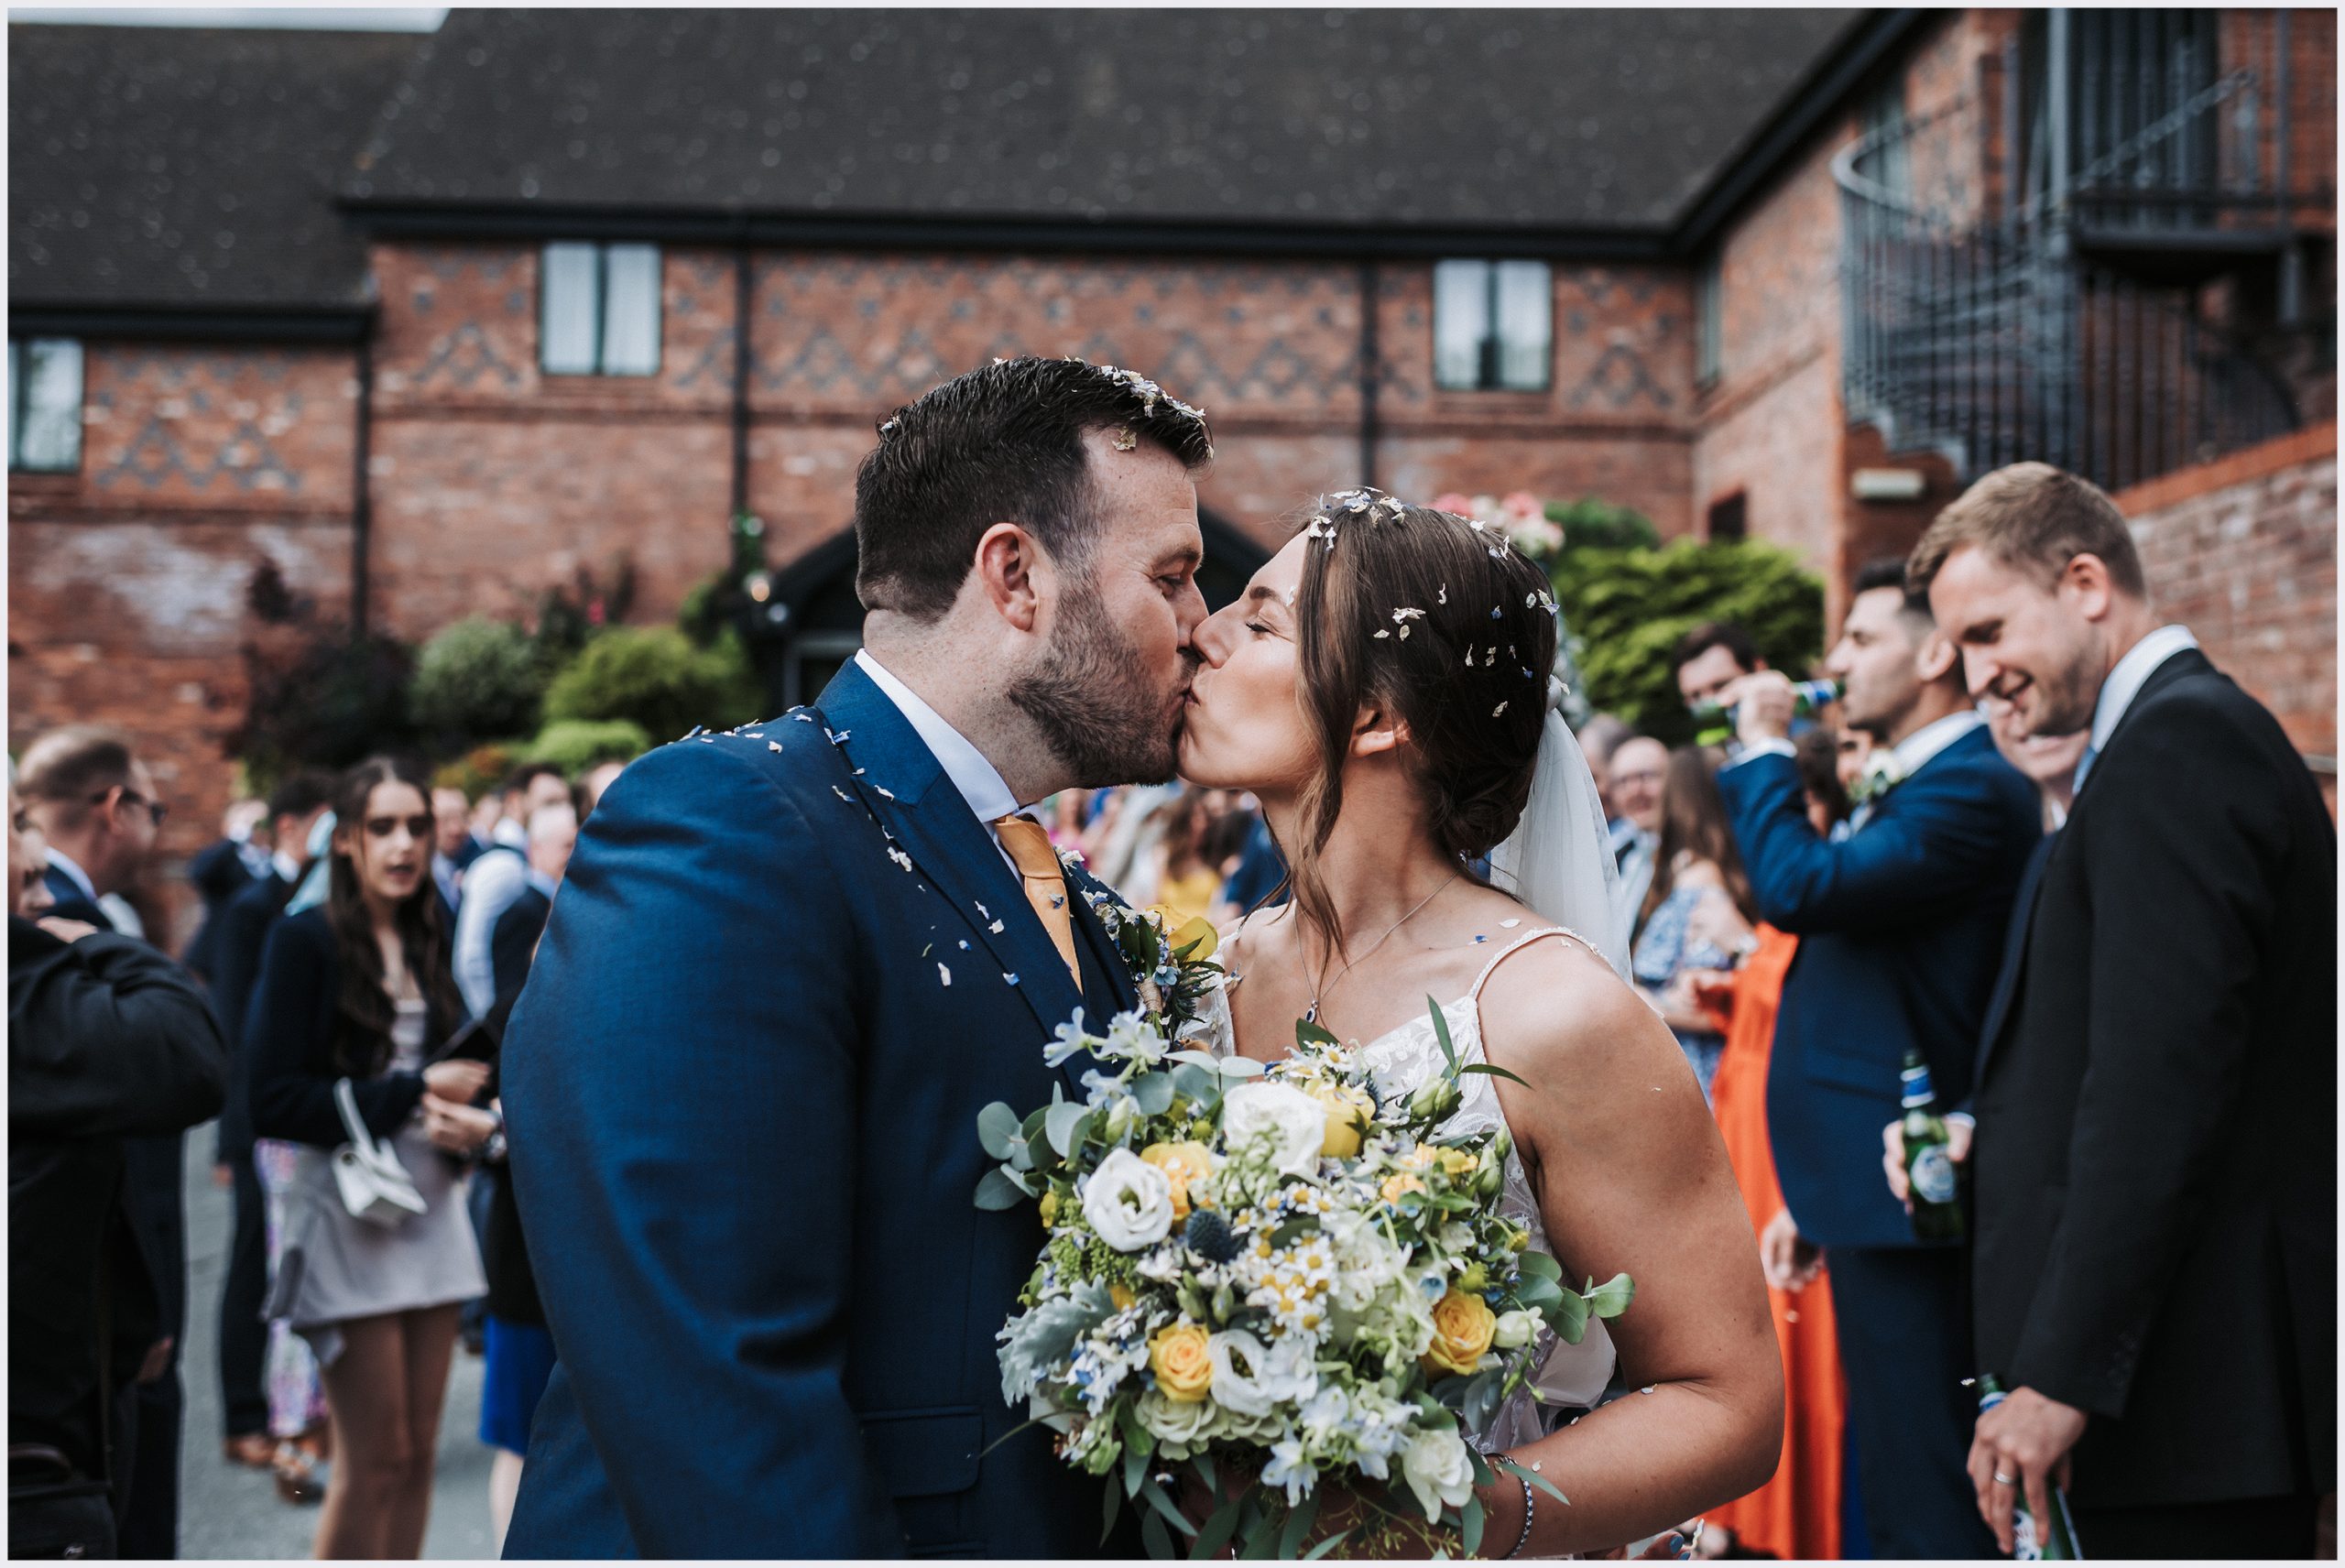 A bride and groom share a kiss covered in confetti at The Grosvenor Pulford Hotel and Spa